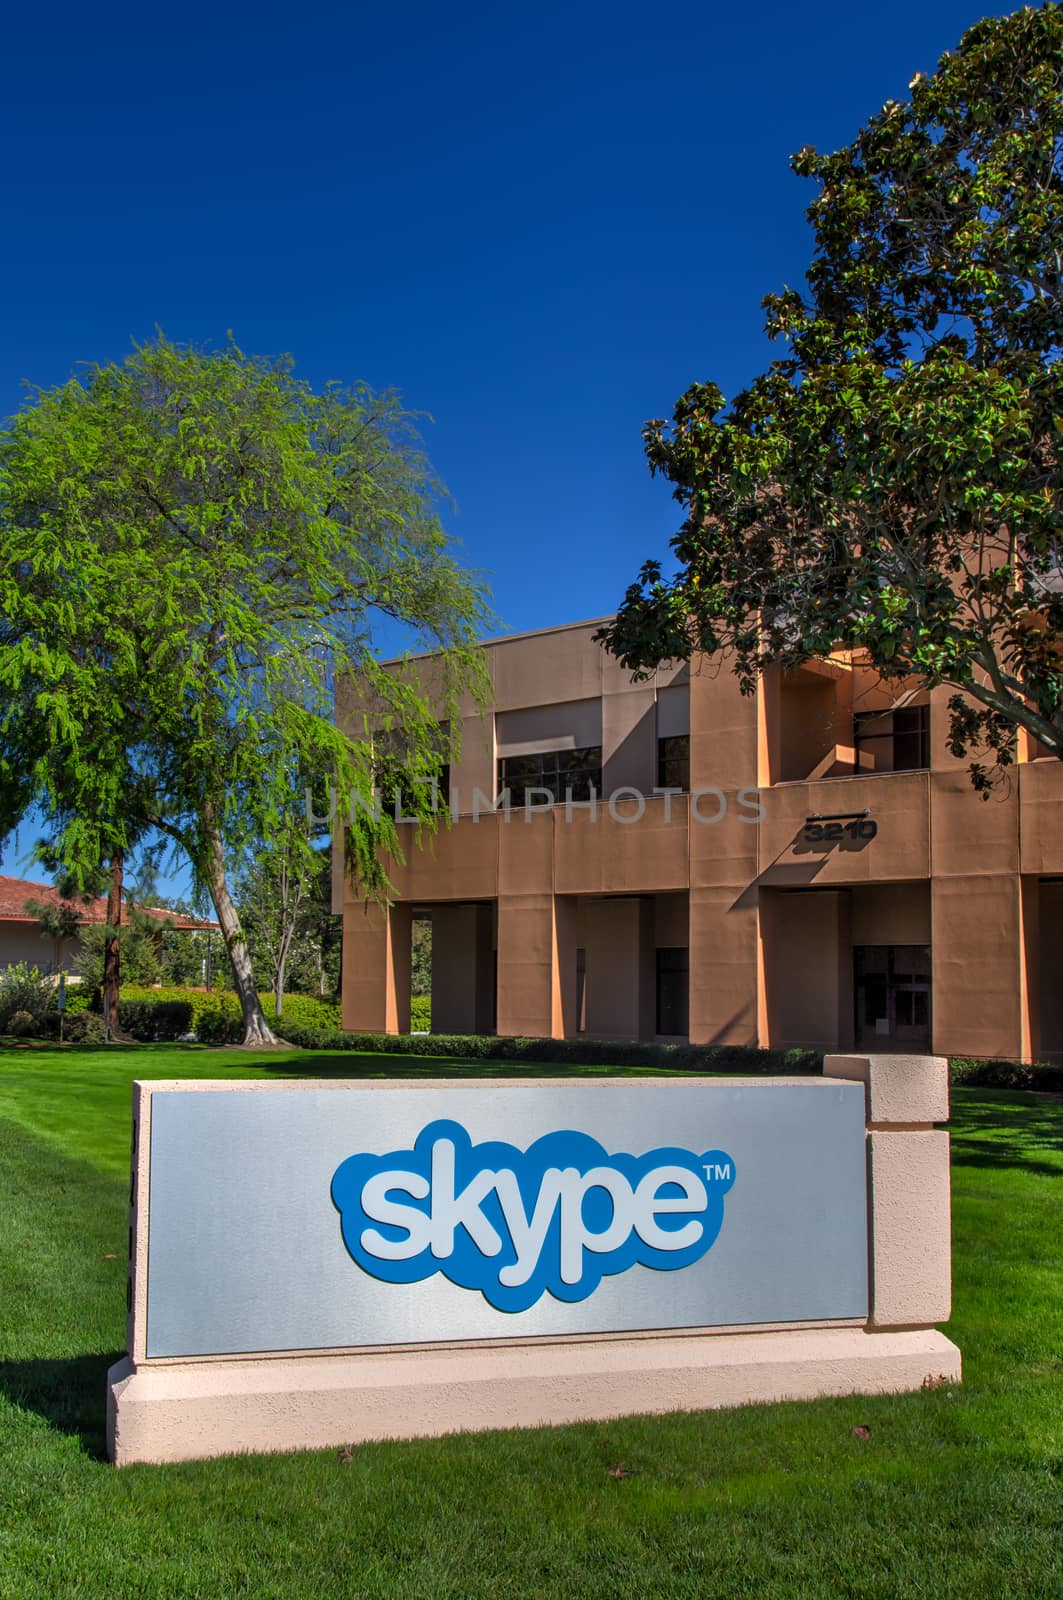 Skype Corporate Building in Silicon Valley by wolterk